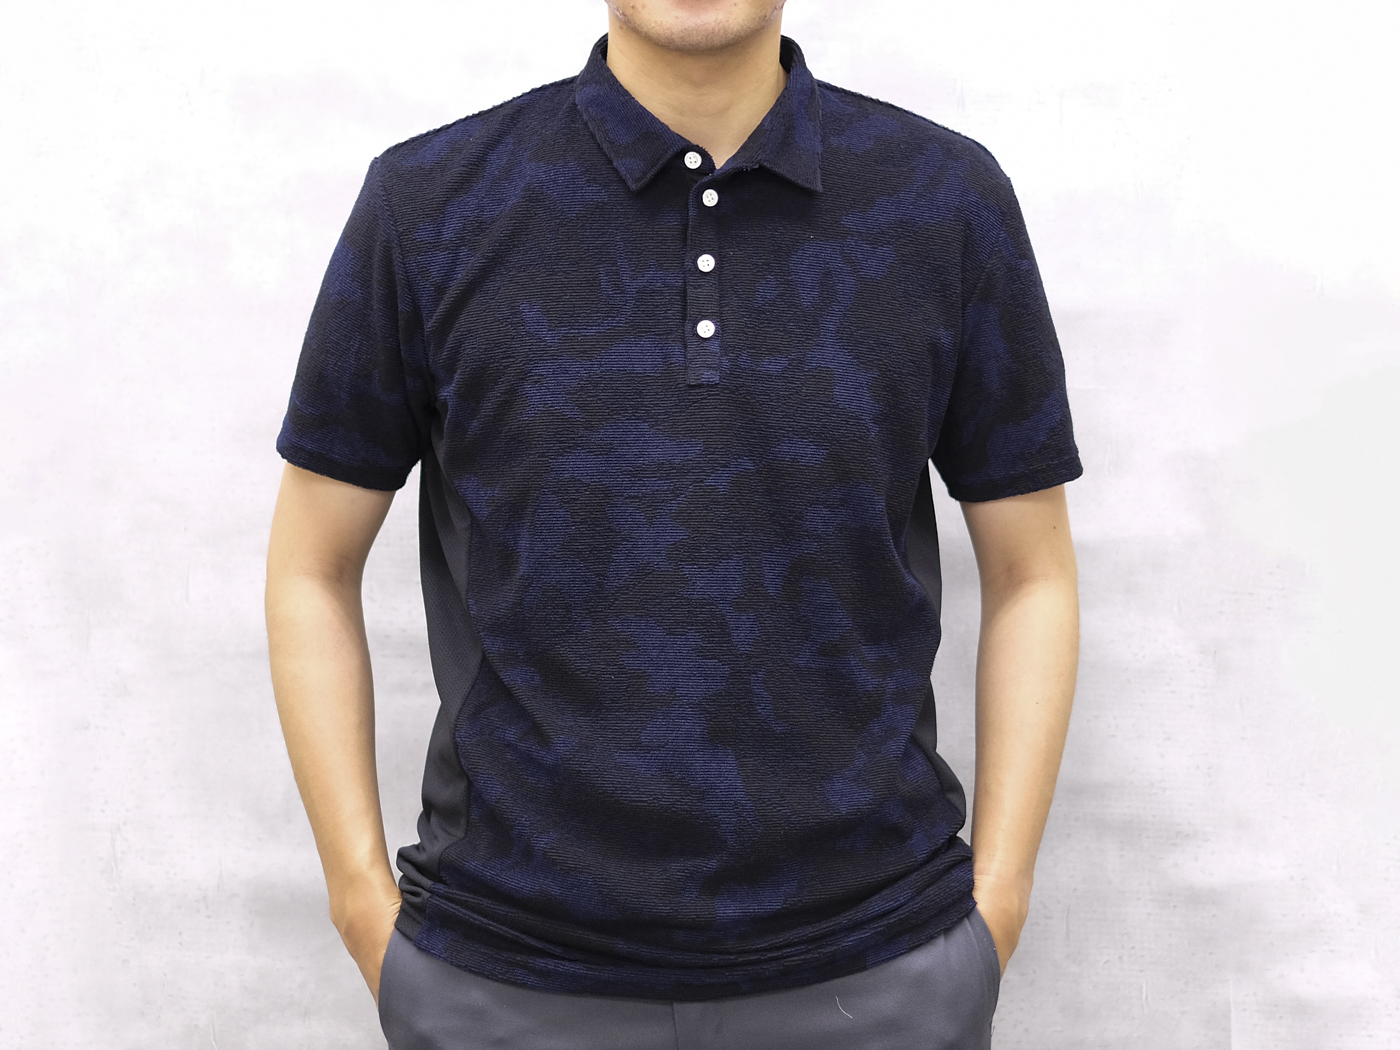 PICK UP POLO SHIRT | feature | wjk online store